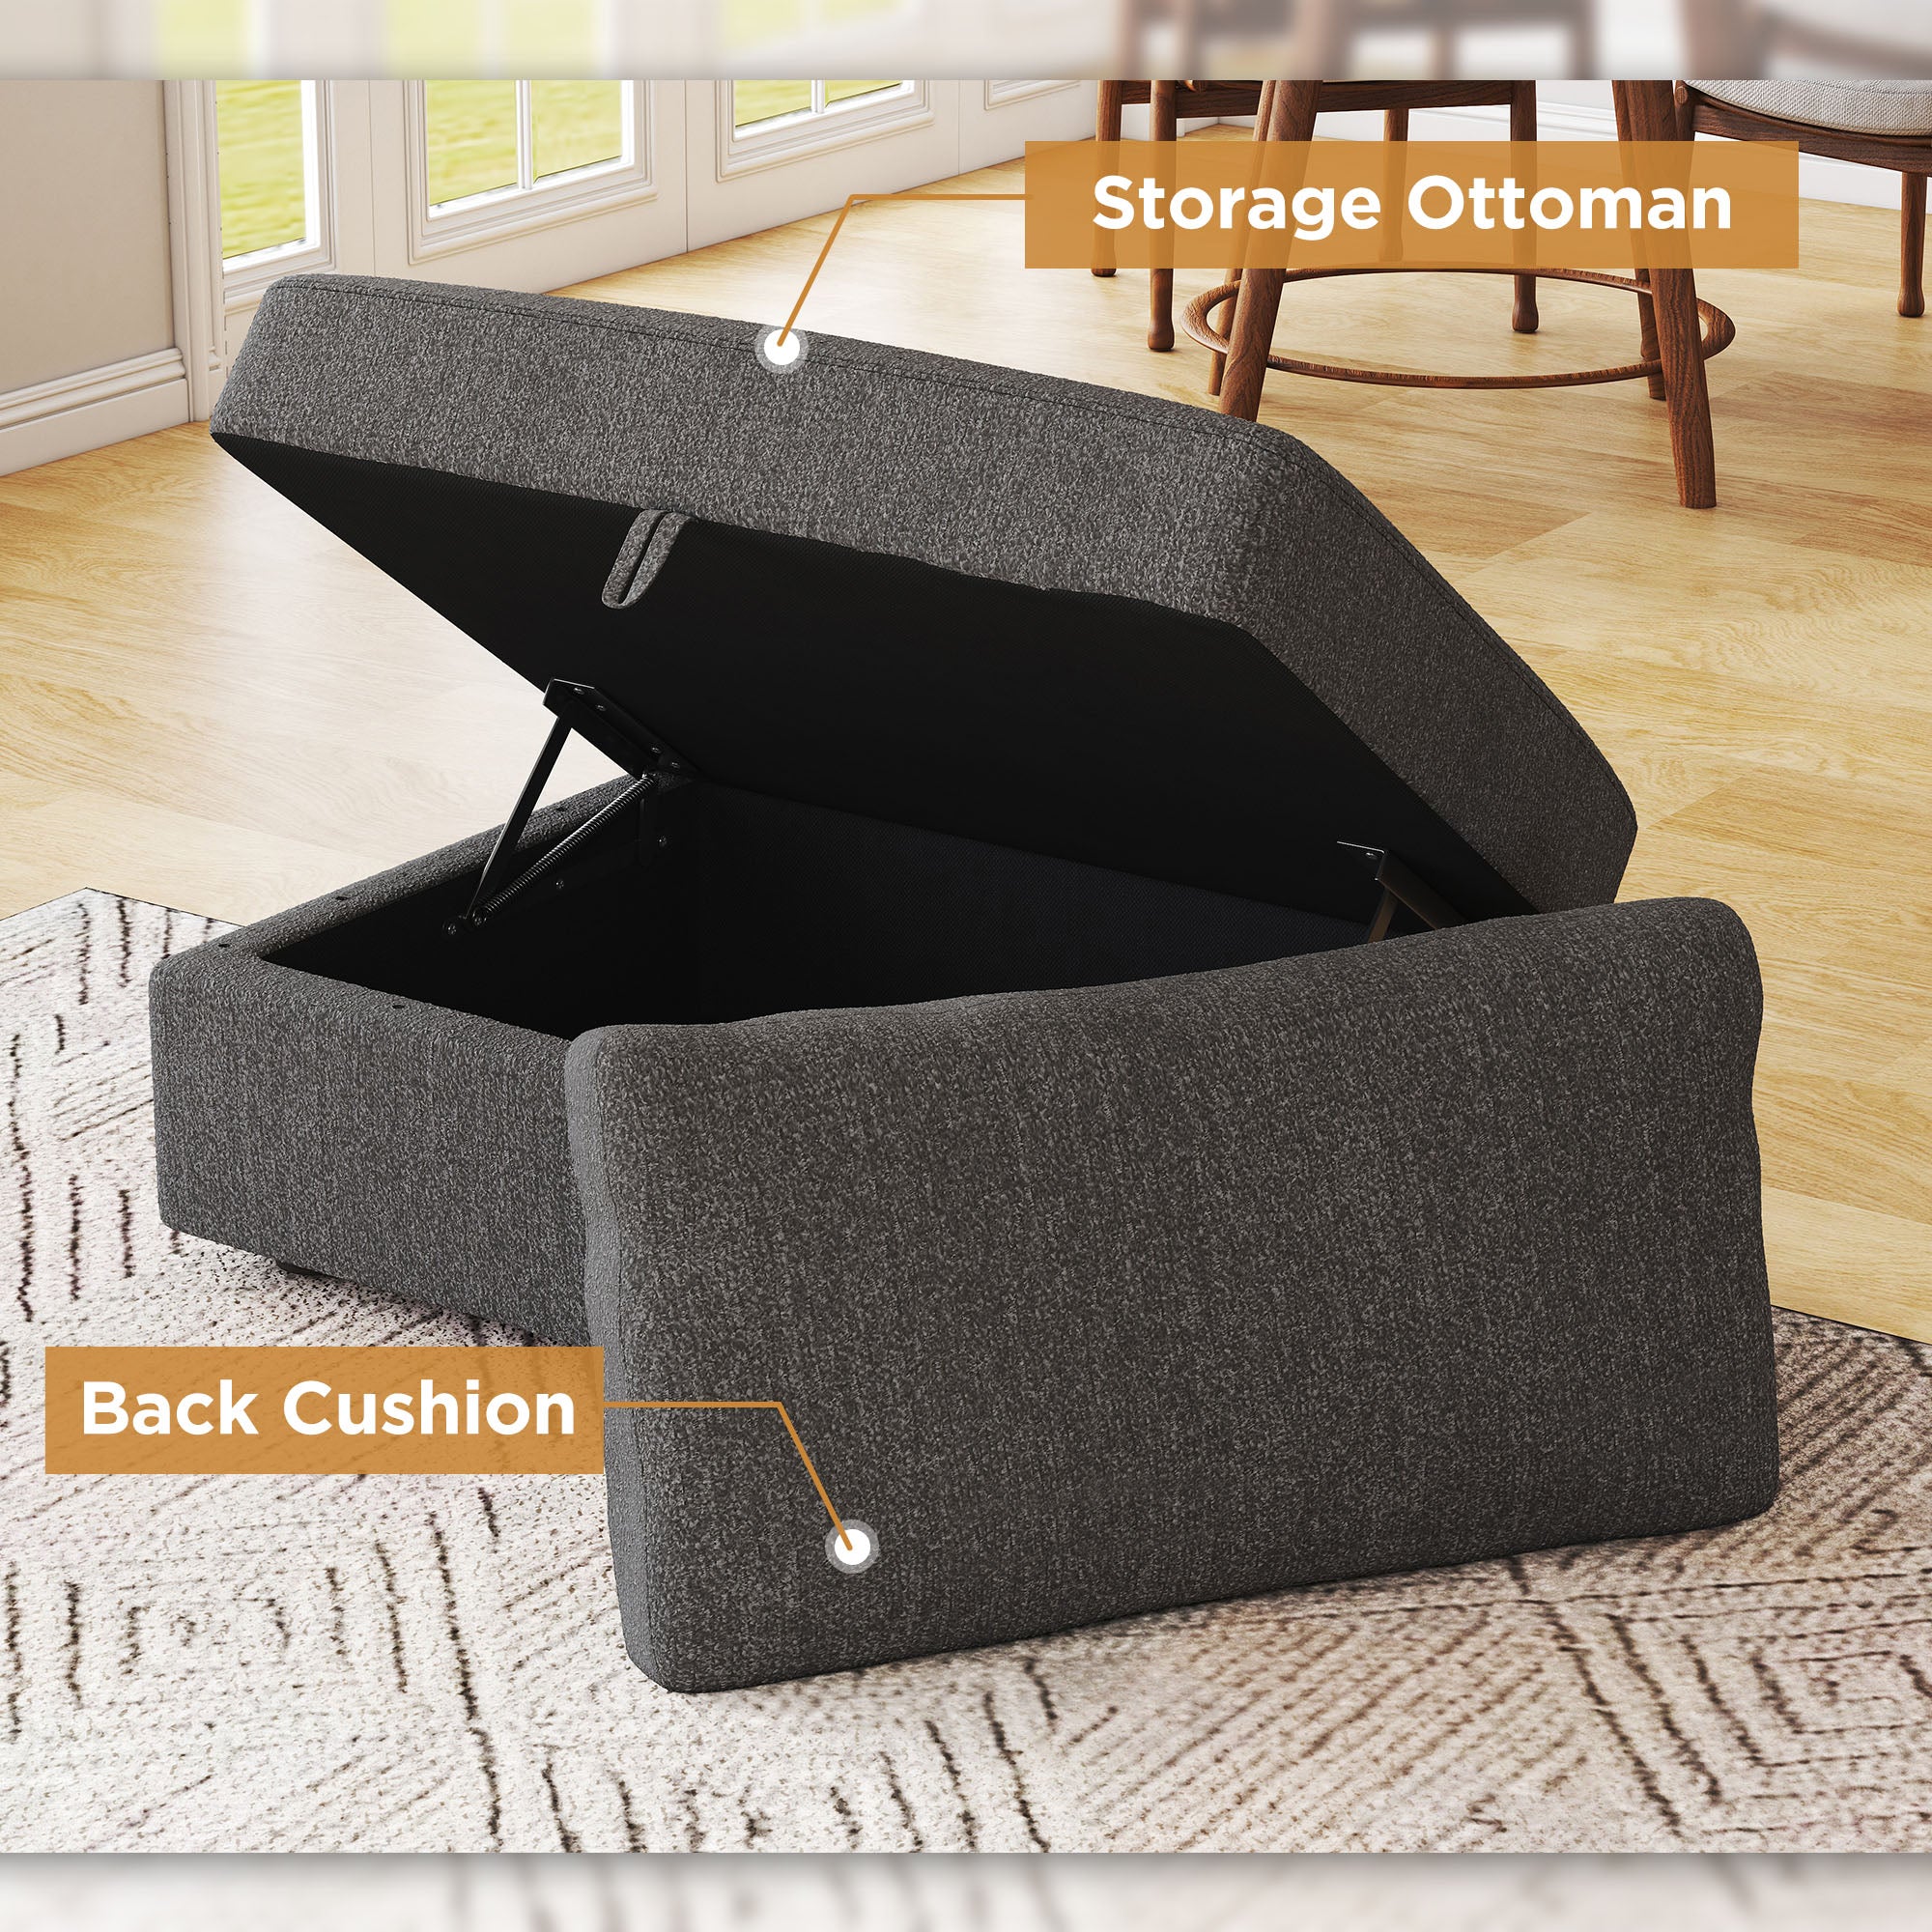 HONBAY Polyester Storage Ottoman with Back Cushion